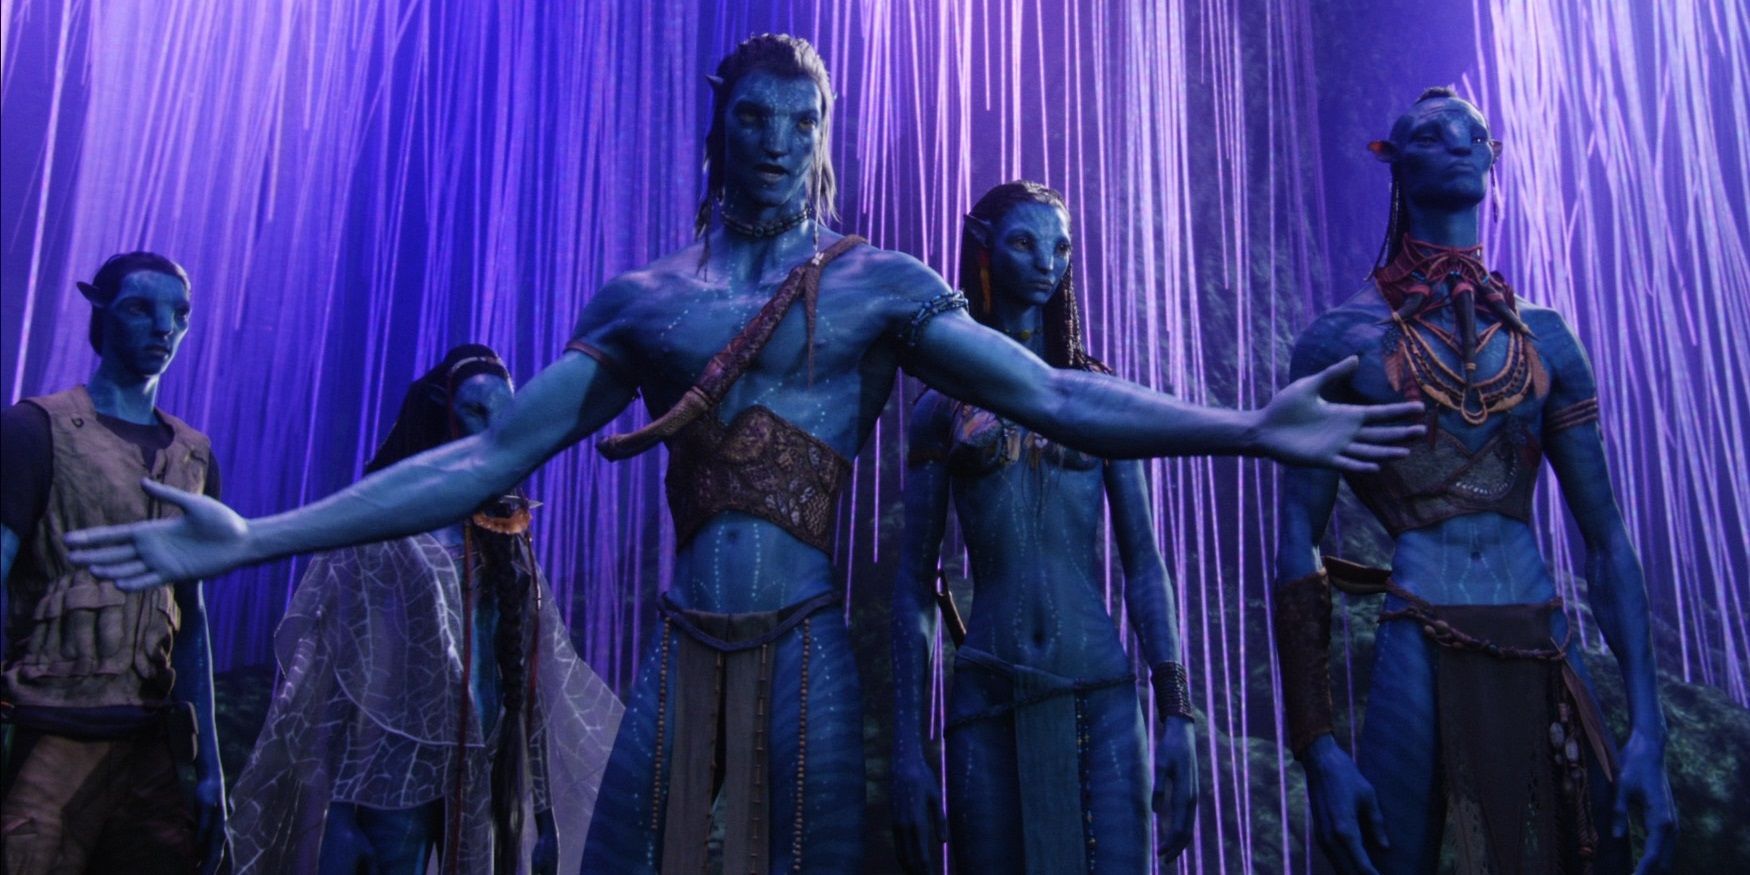 Jake and the Na'vi from Avatar